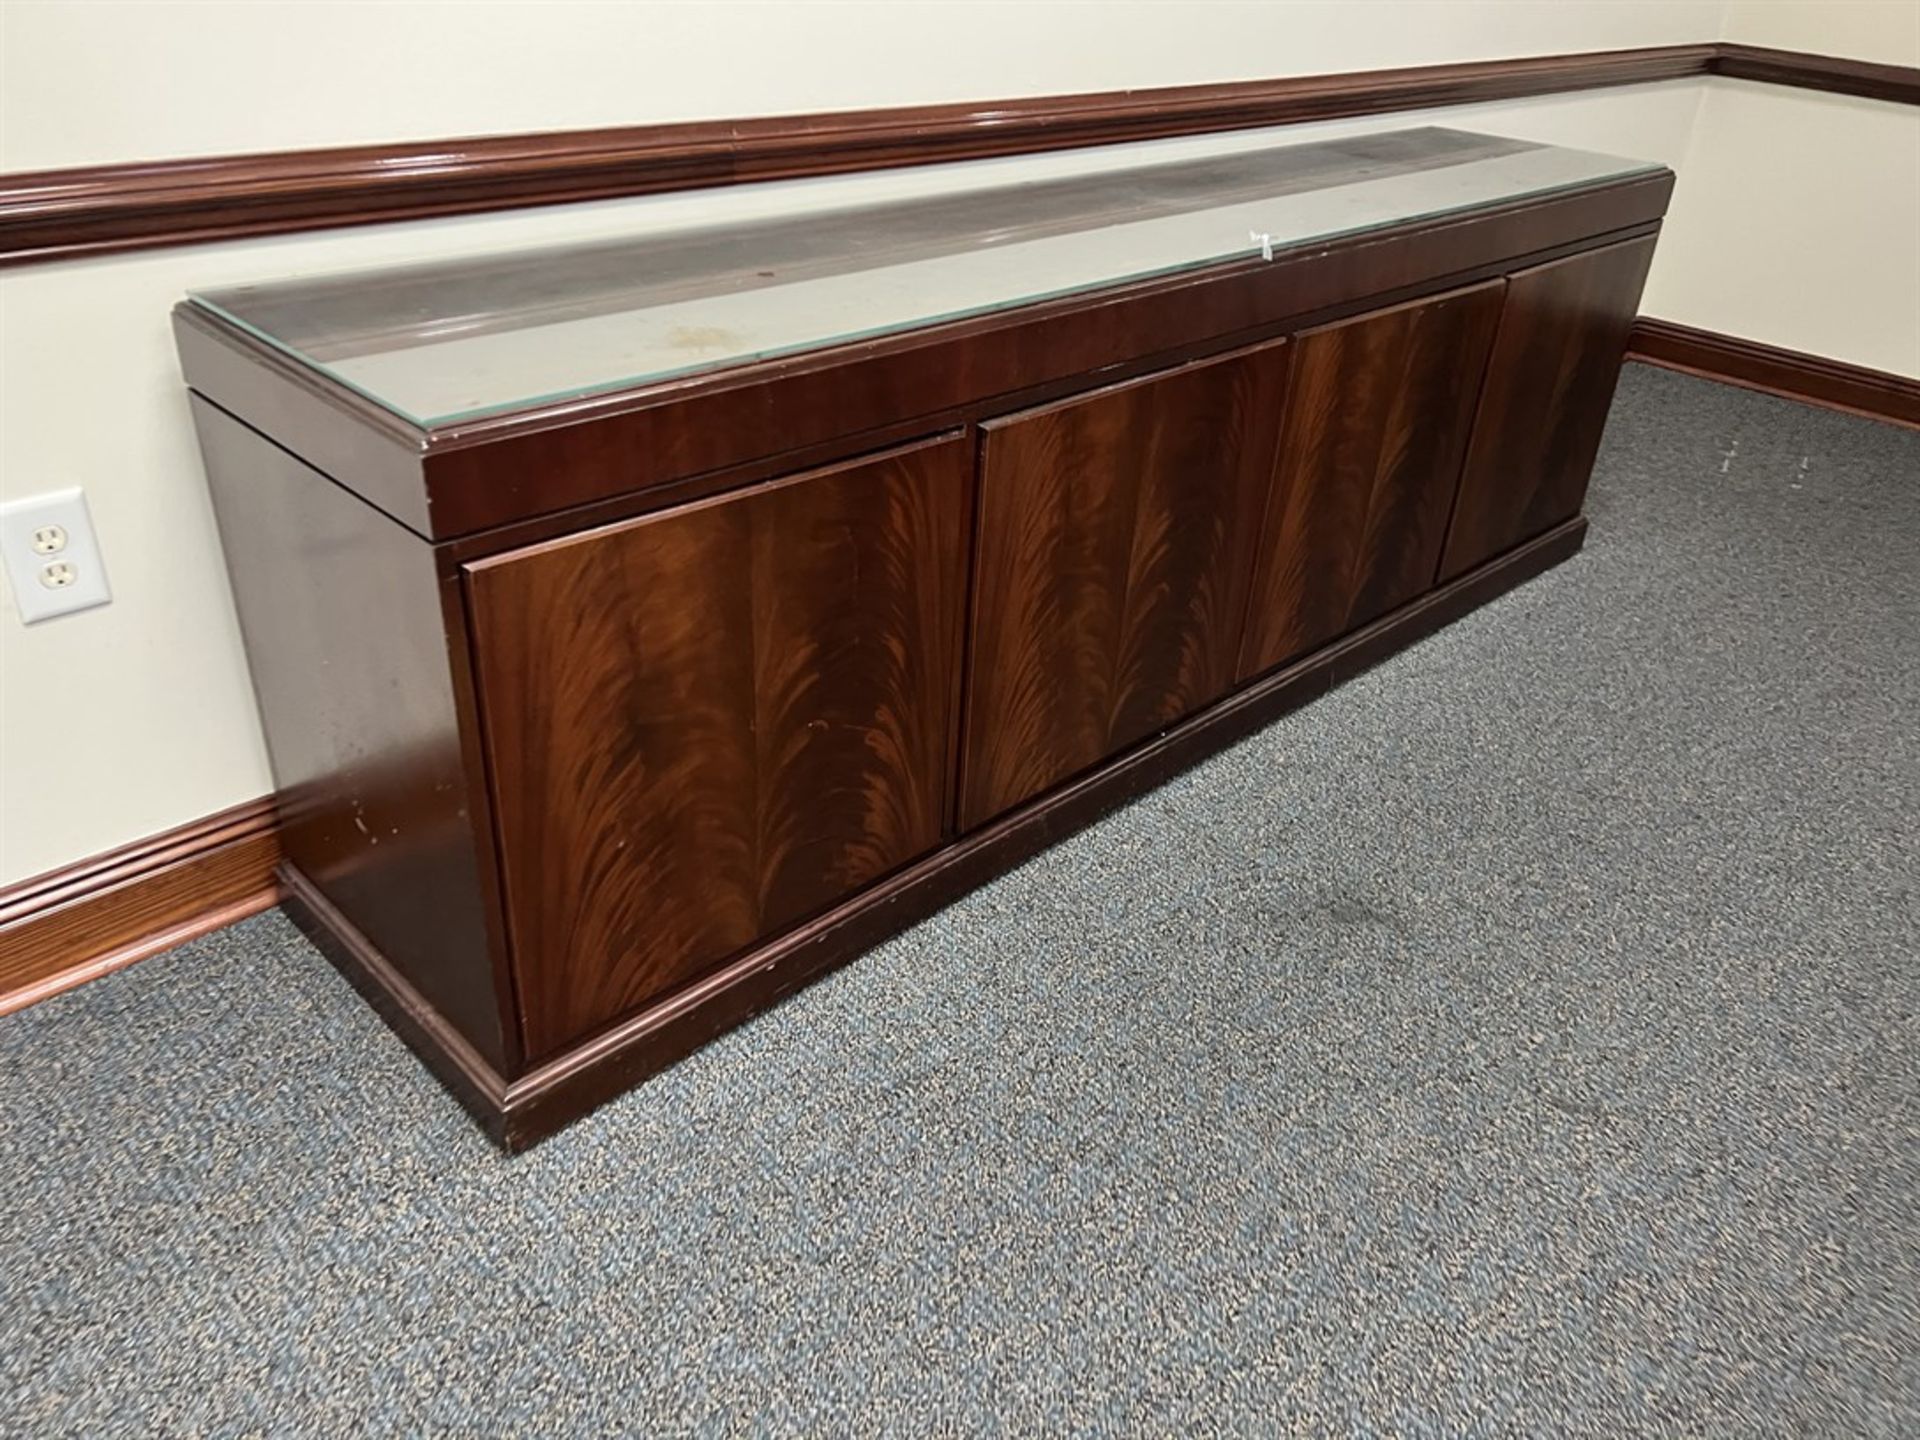 Contents of Office, Approx. 15' x 4' Conference Table, Side Table, Credenza (BUILDING 32) - Image 3 of 3